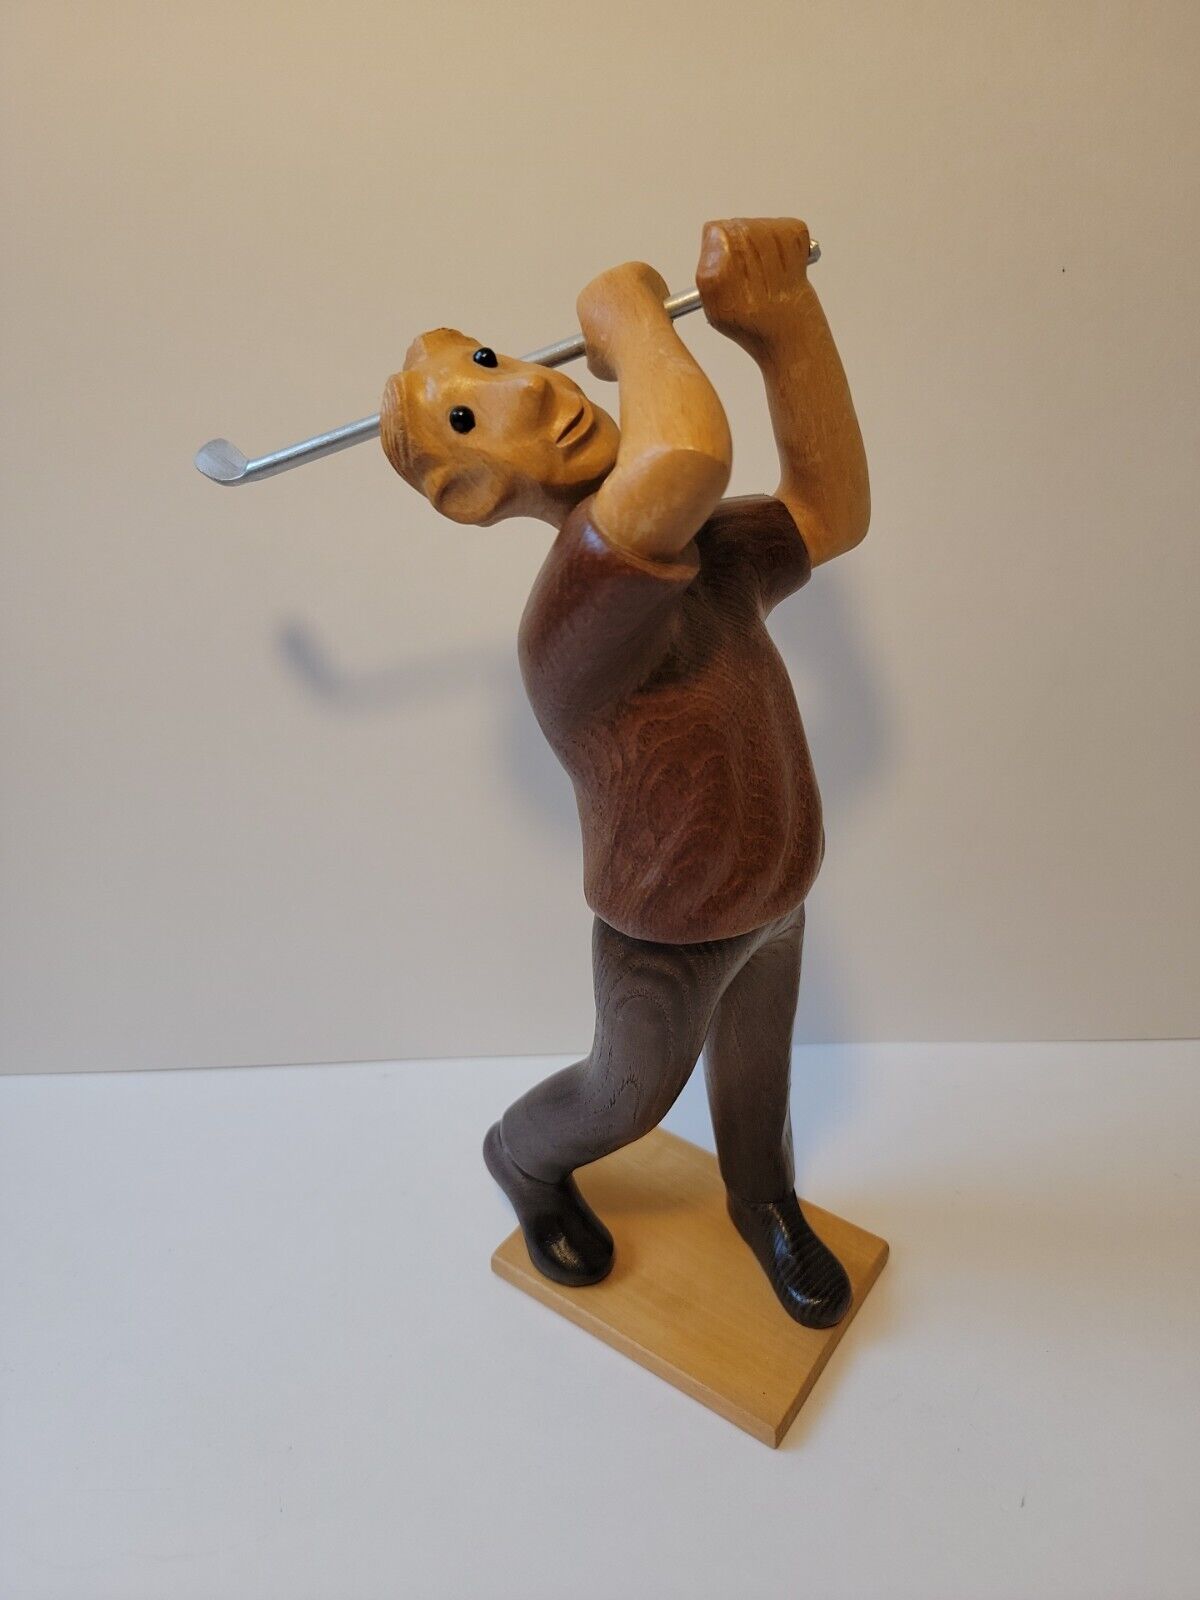 Alex Cramer Co Wooden Carving Statue Figurine Figure Male Golfer Made in Italy